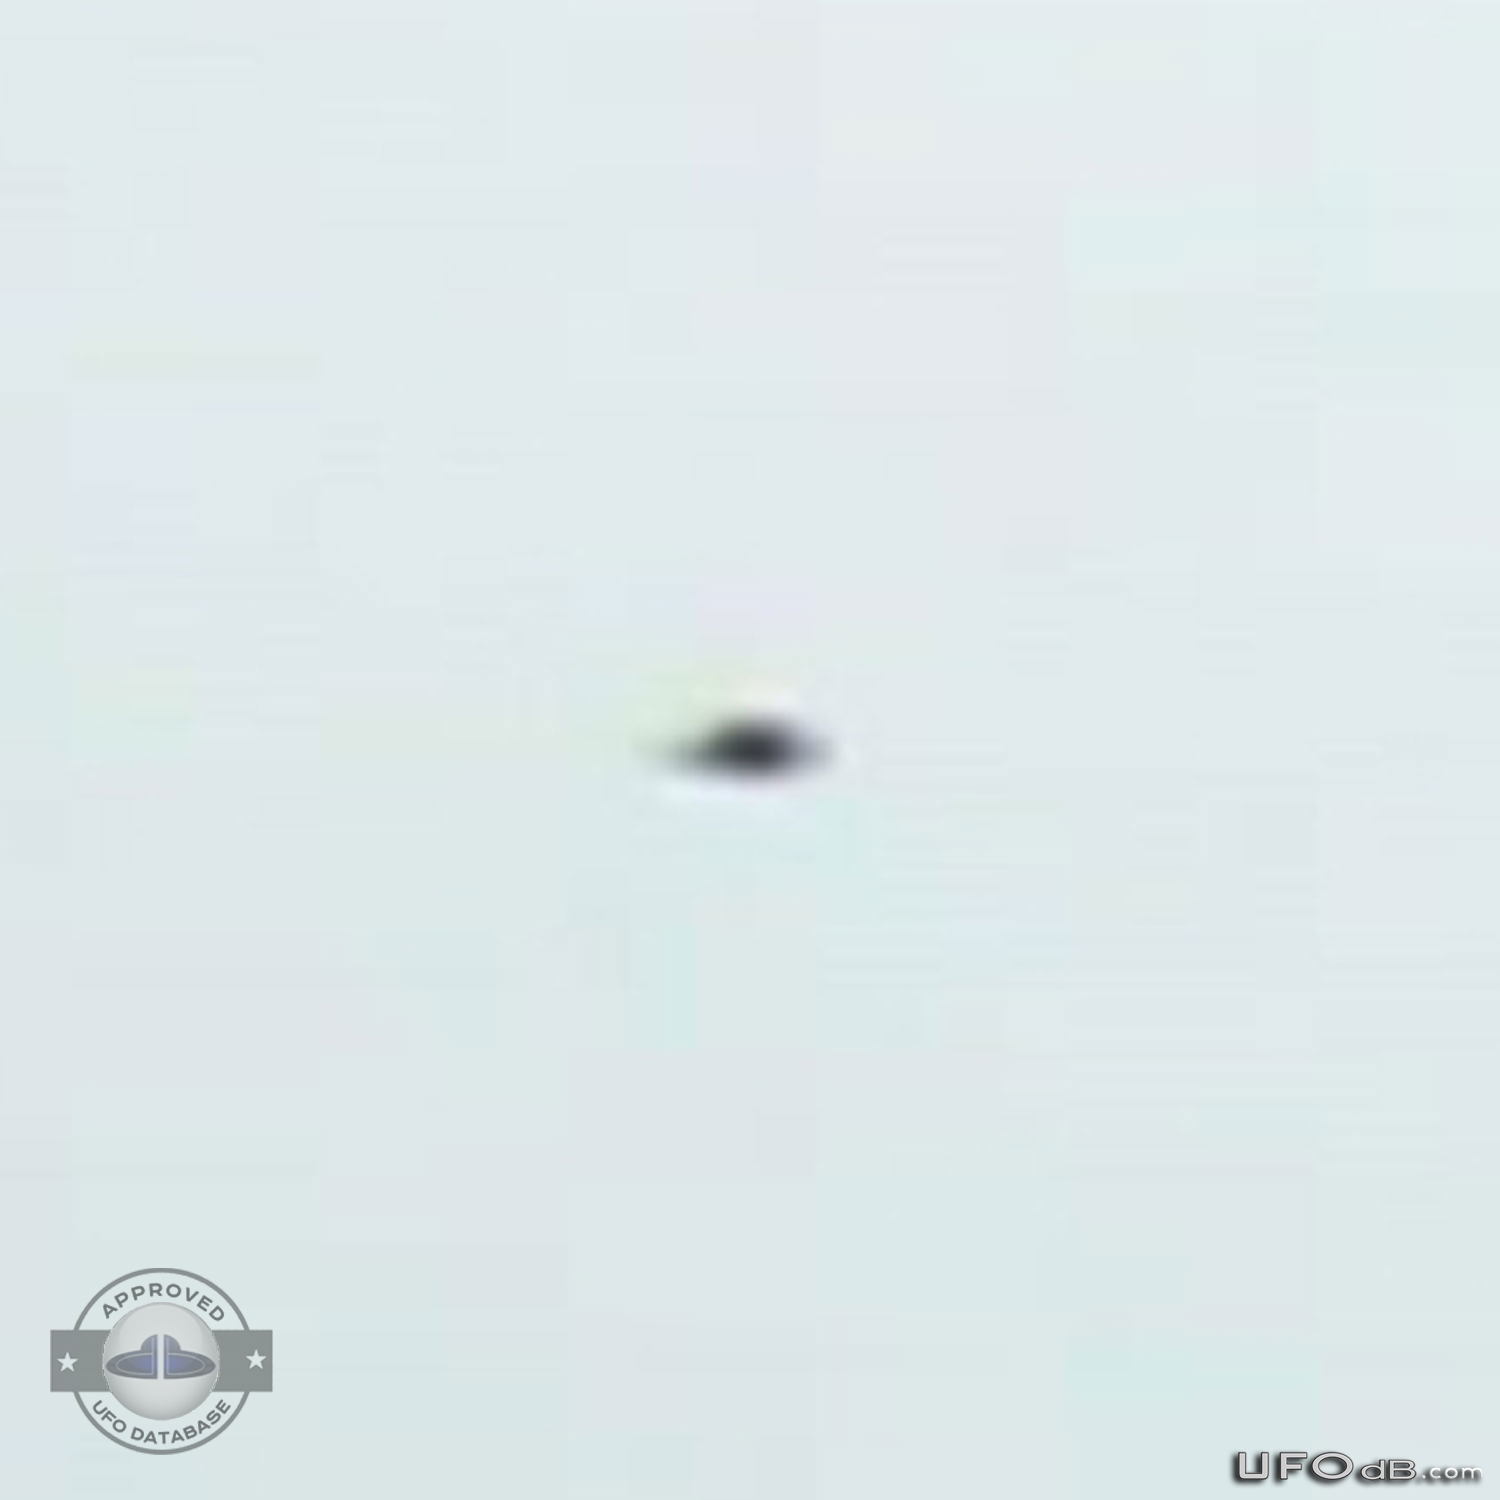 UFO caught on picture near the Resort World Sentosa in Singapore 2010 UFO Picture #393-5